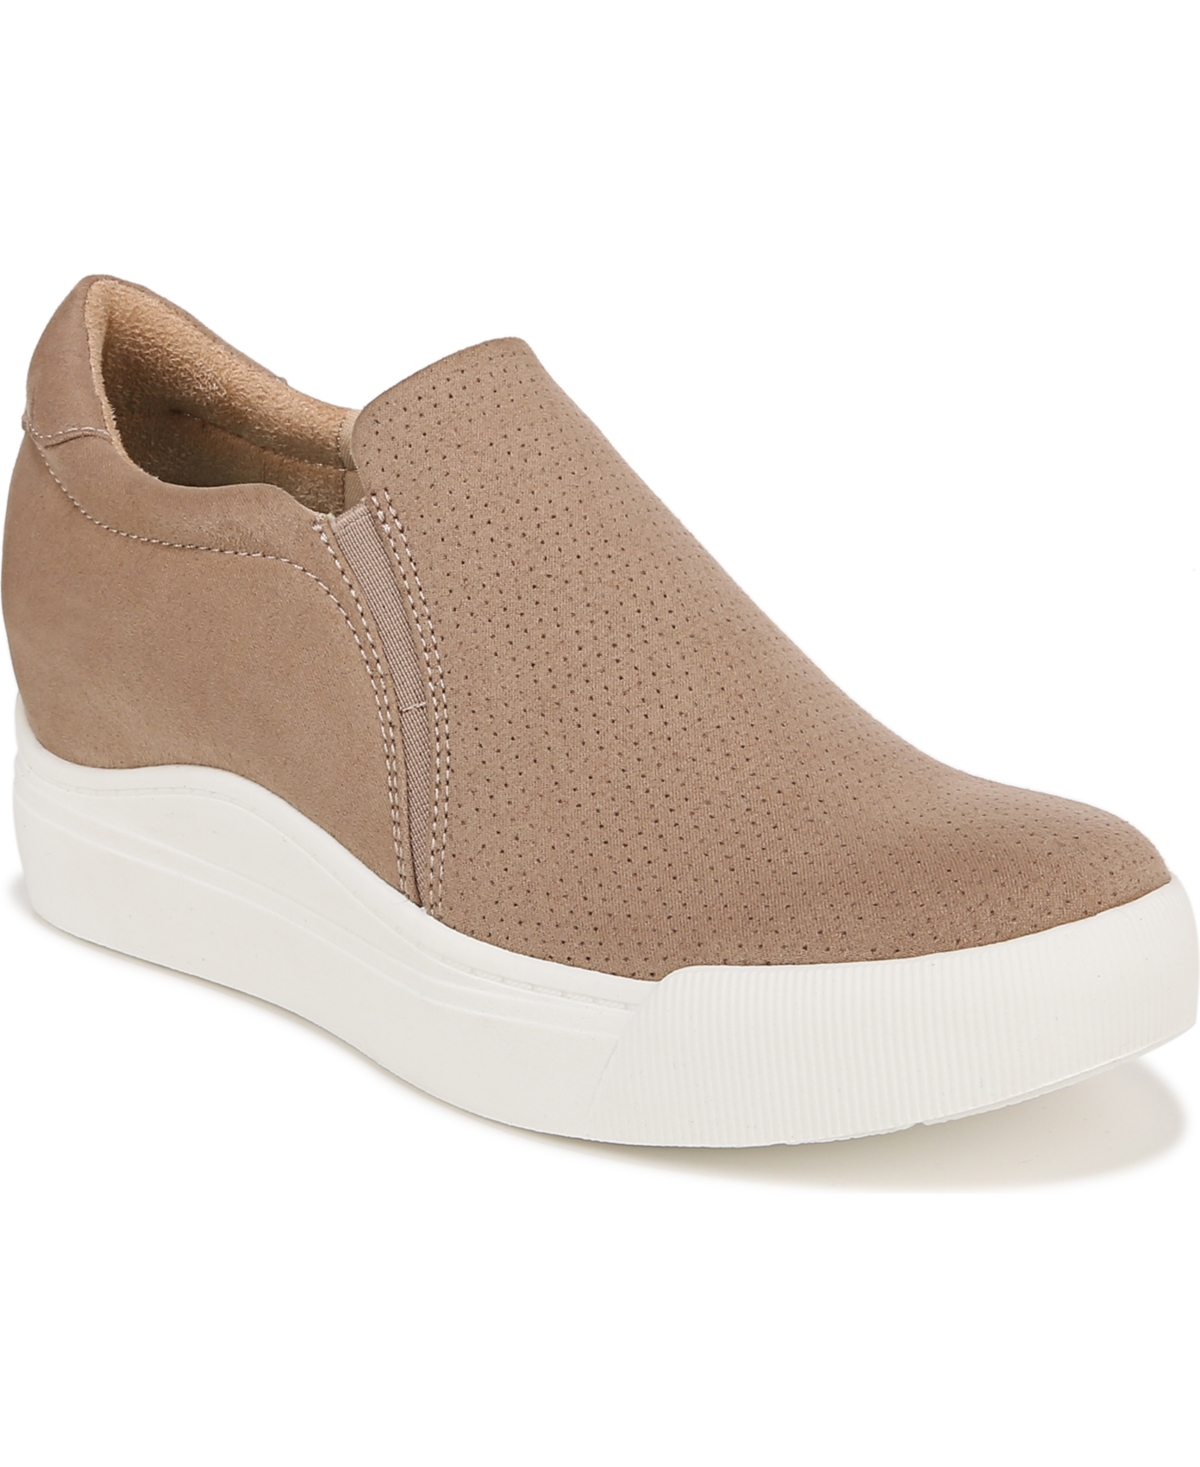 Dr. Scholl's Women's Time Off Wedge Slip-on Sneakers In Toasted Taupe Microfiber